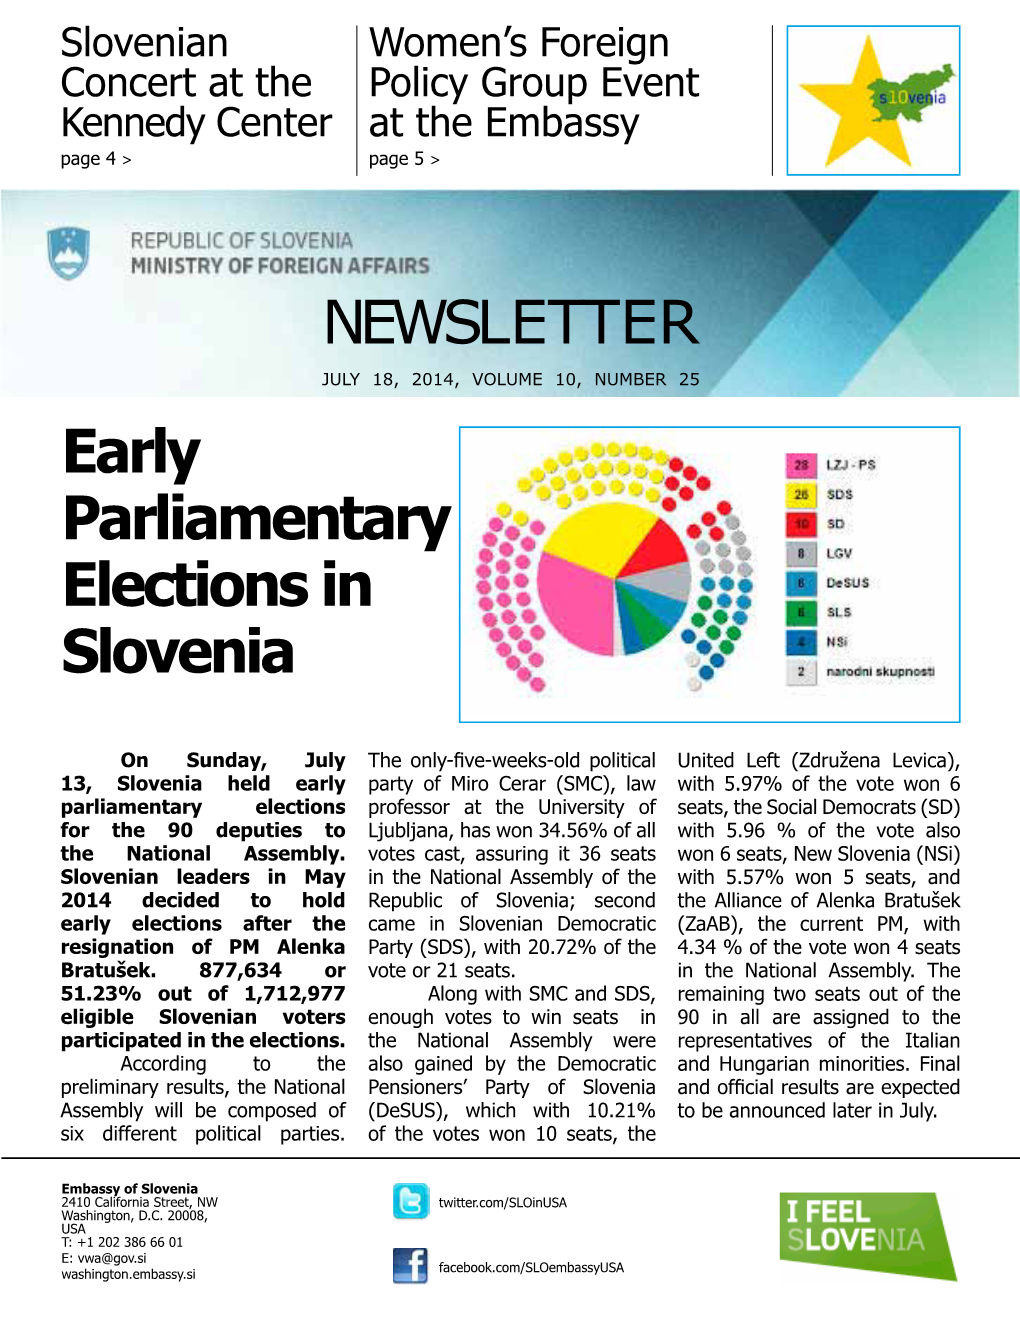 NEWSLETTER Early Parliamentary Elections in Slovenia